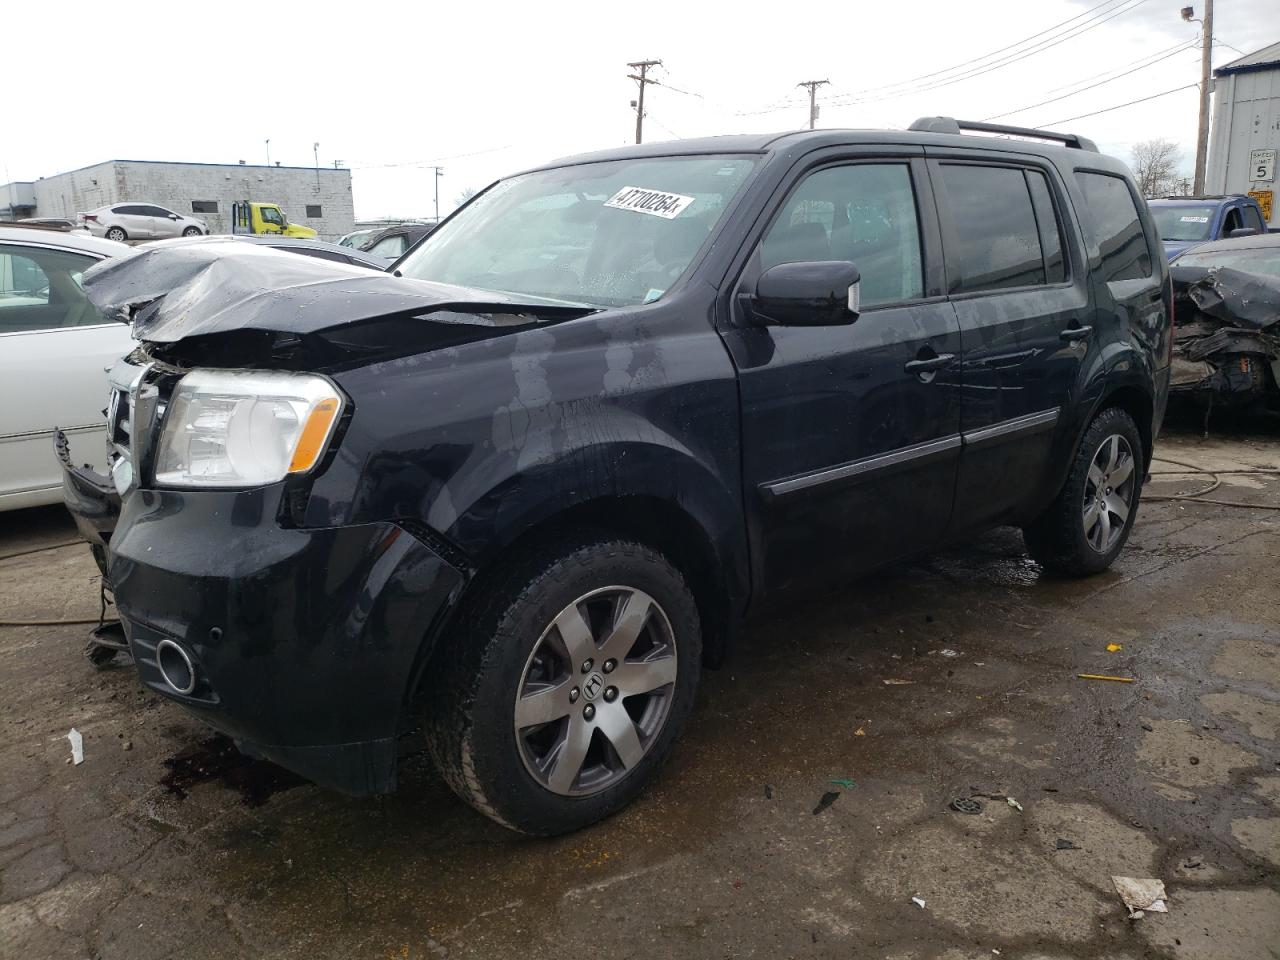 vin: 5FNYF4H93FB023133 5FNYF4H93FB023133 2015 honda pilot 3500 for Sale in 60411 5546, Il - Chicago South, Chicago Heights, USA